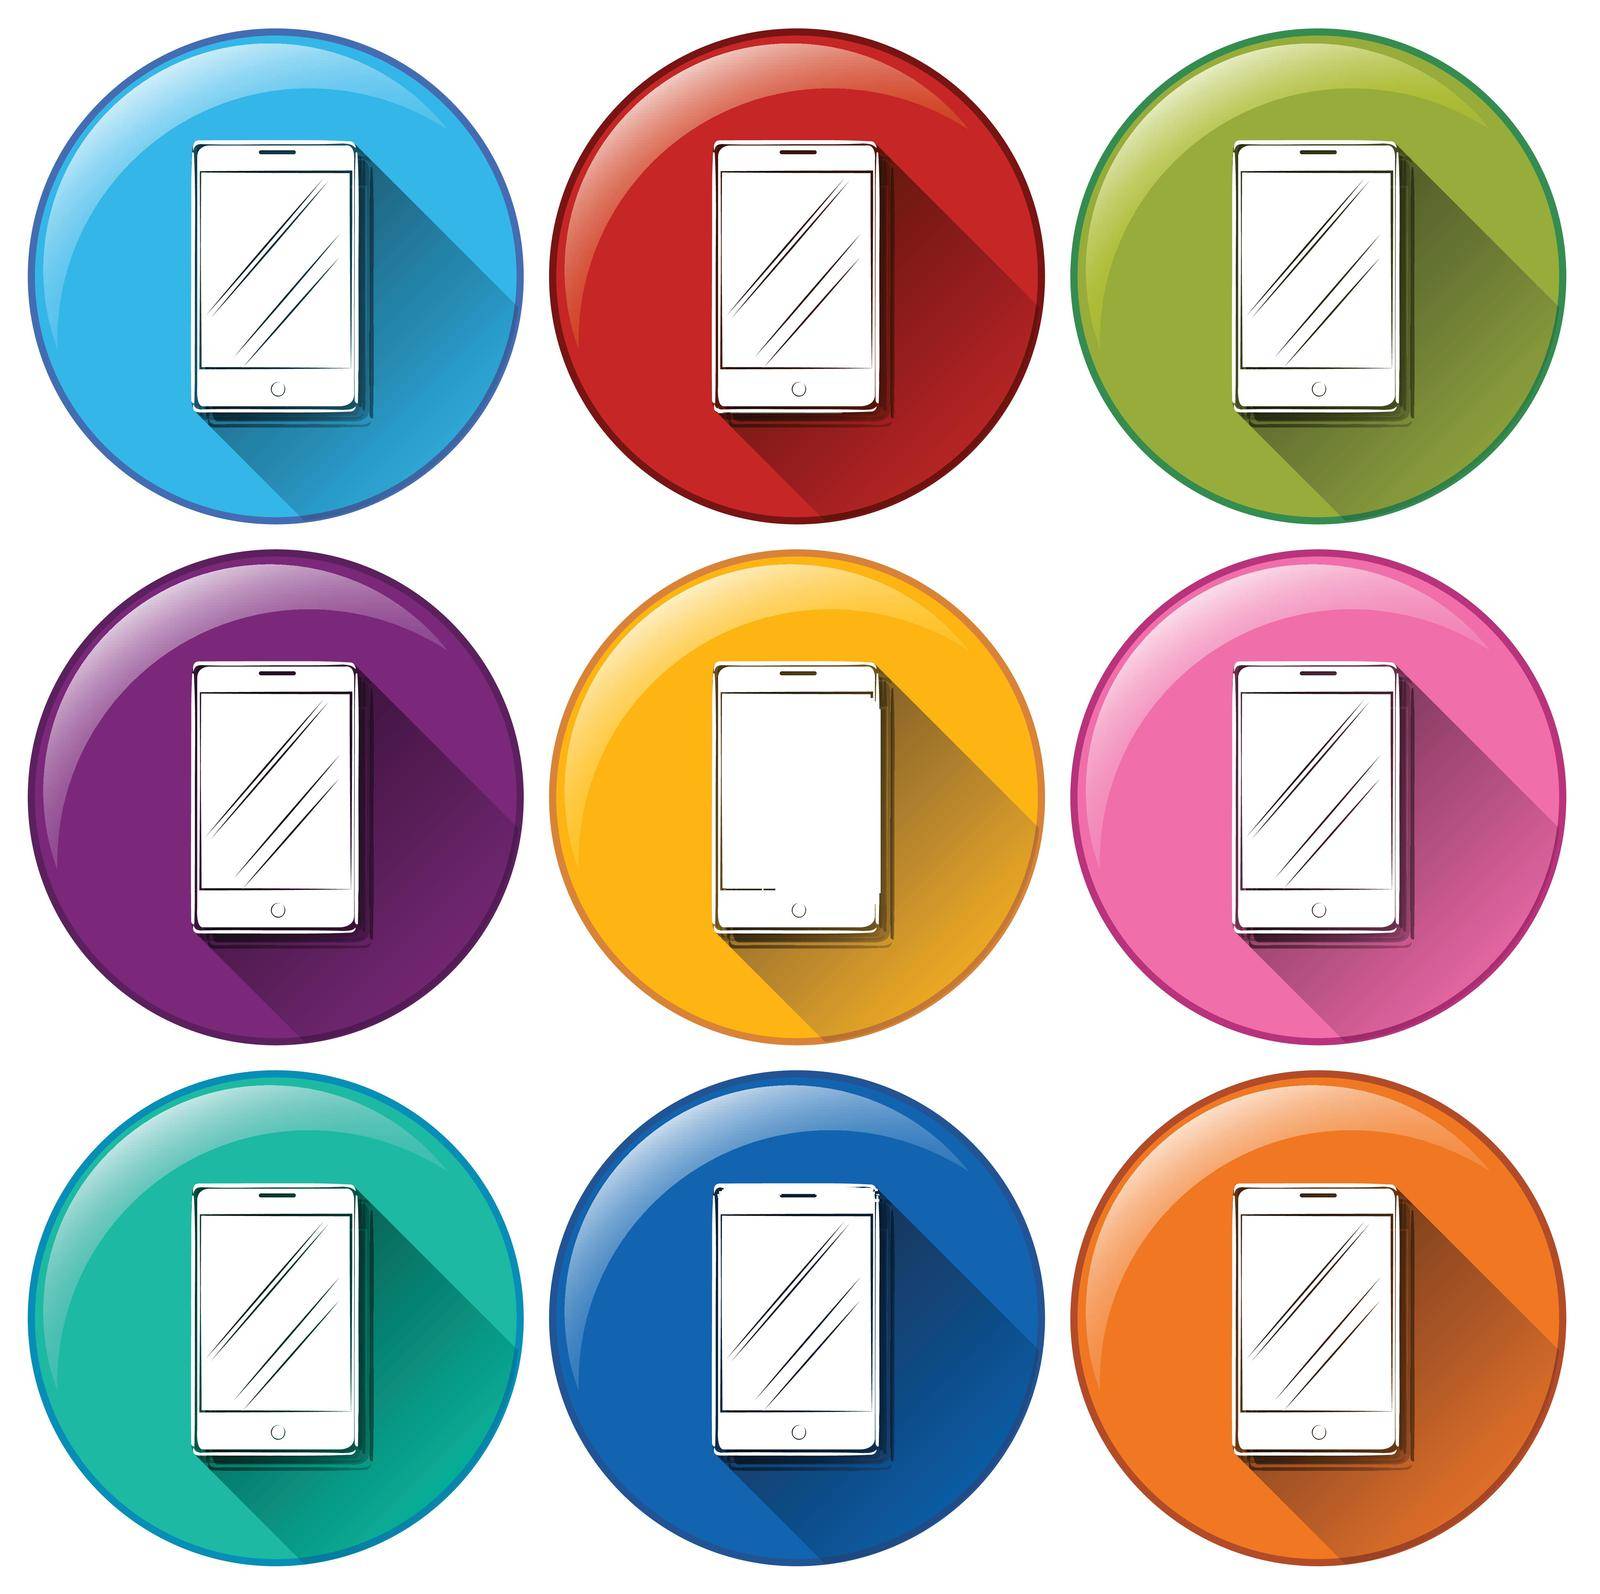 Rounded icons with cellular phones by iimages